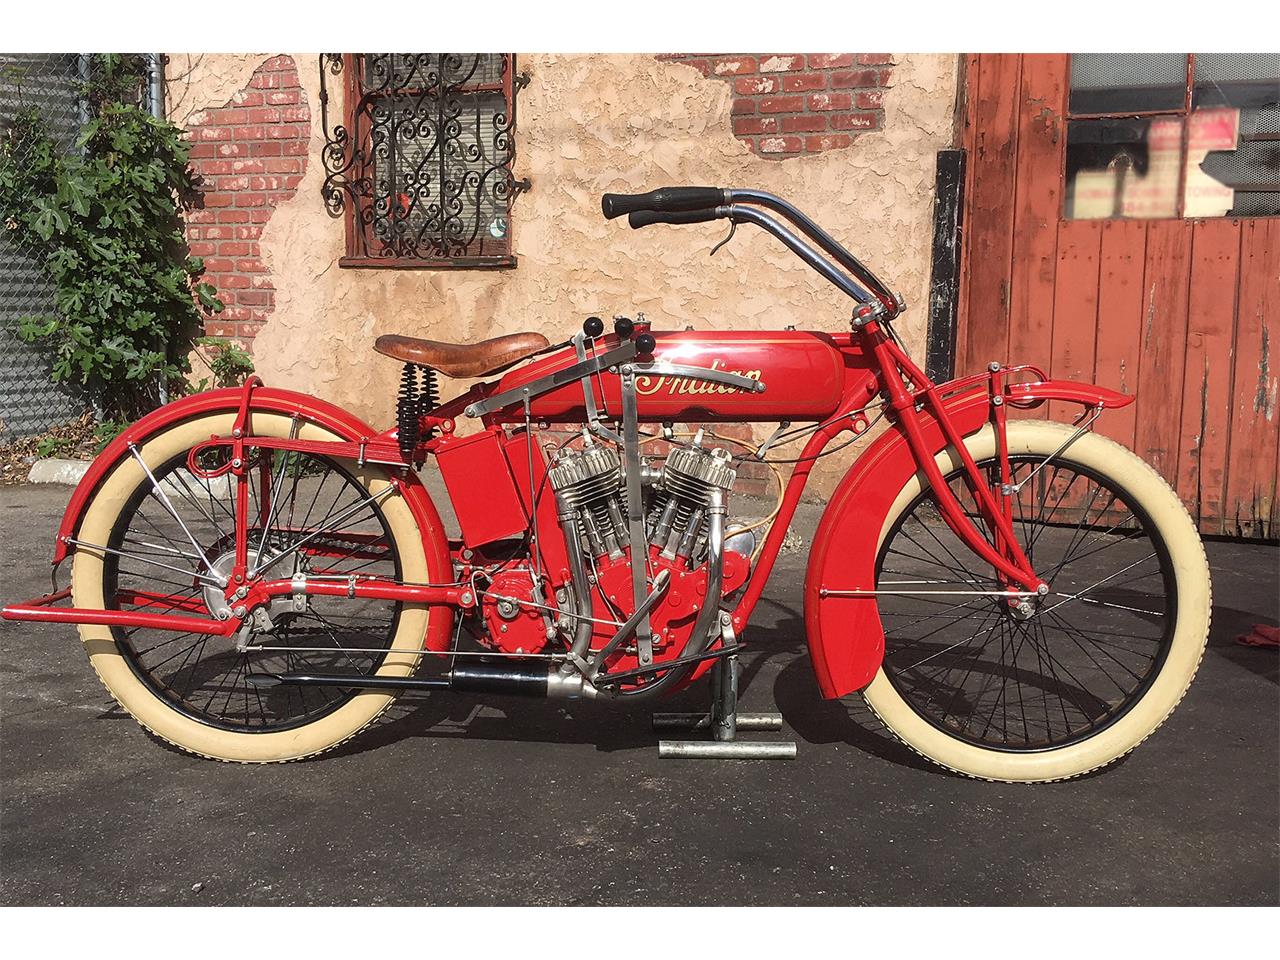 1919 Indian Motorcycle for Sale | ClassicCars.com | CC-1243105